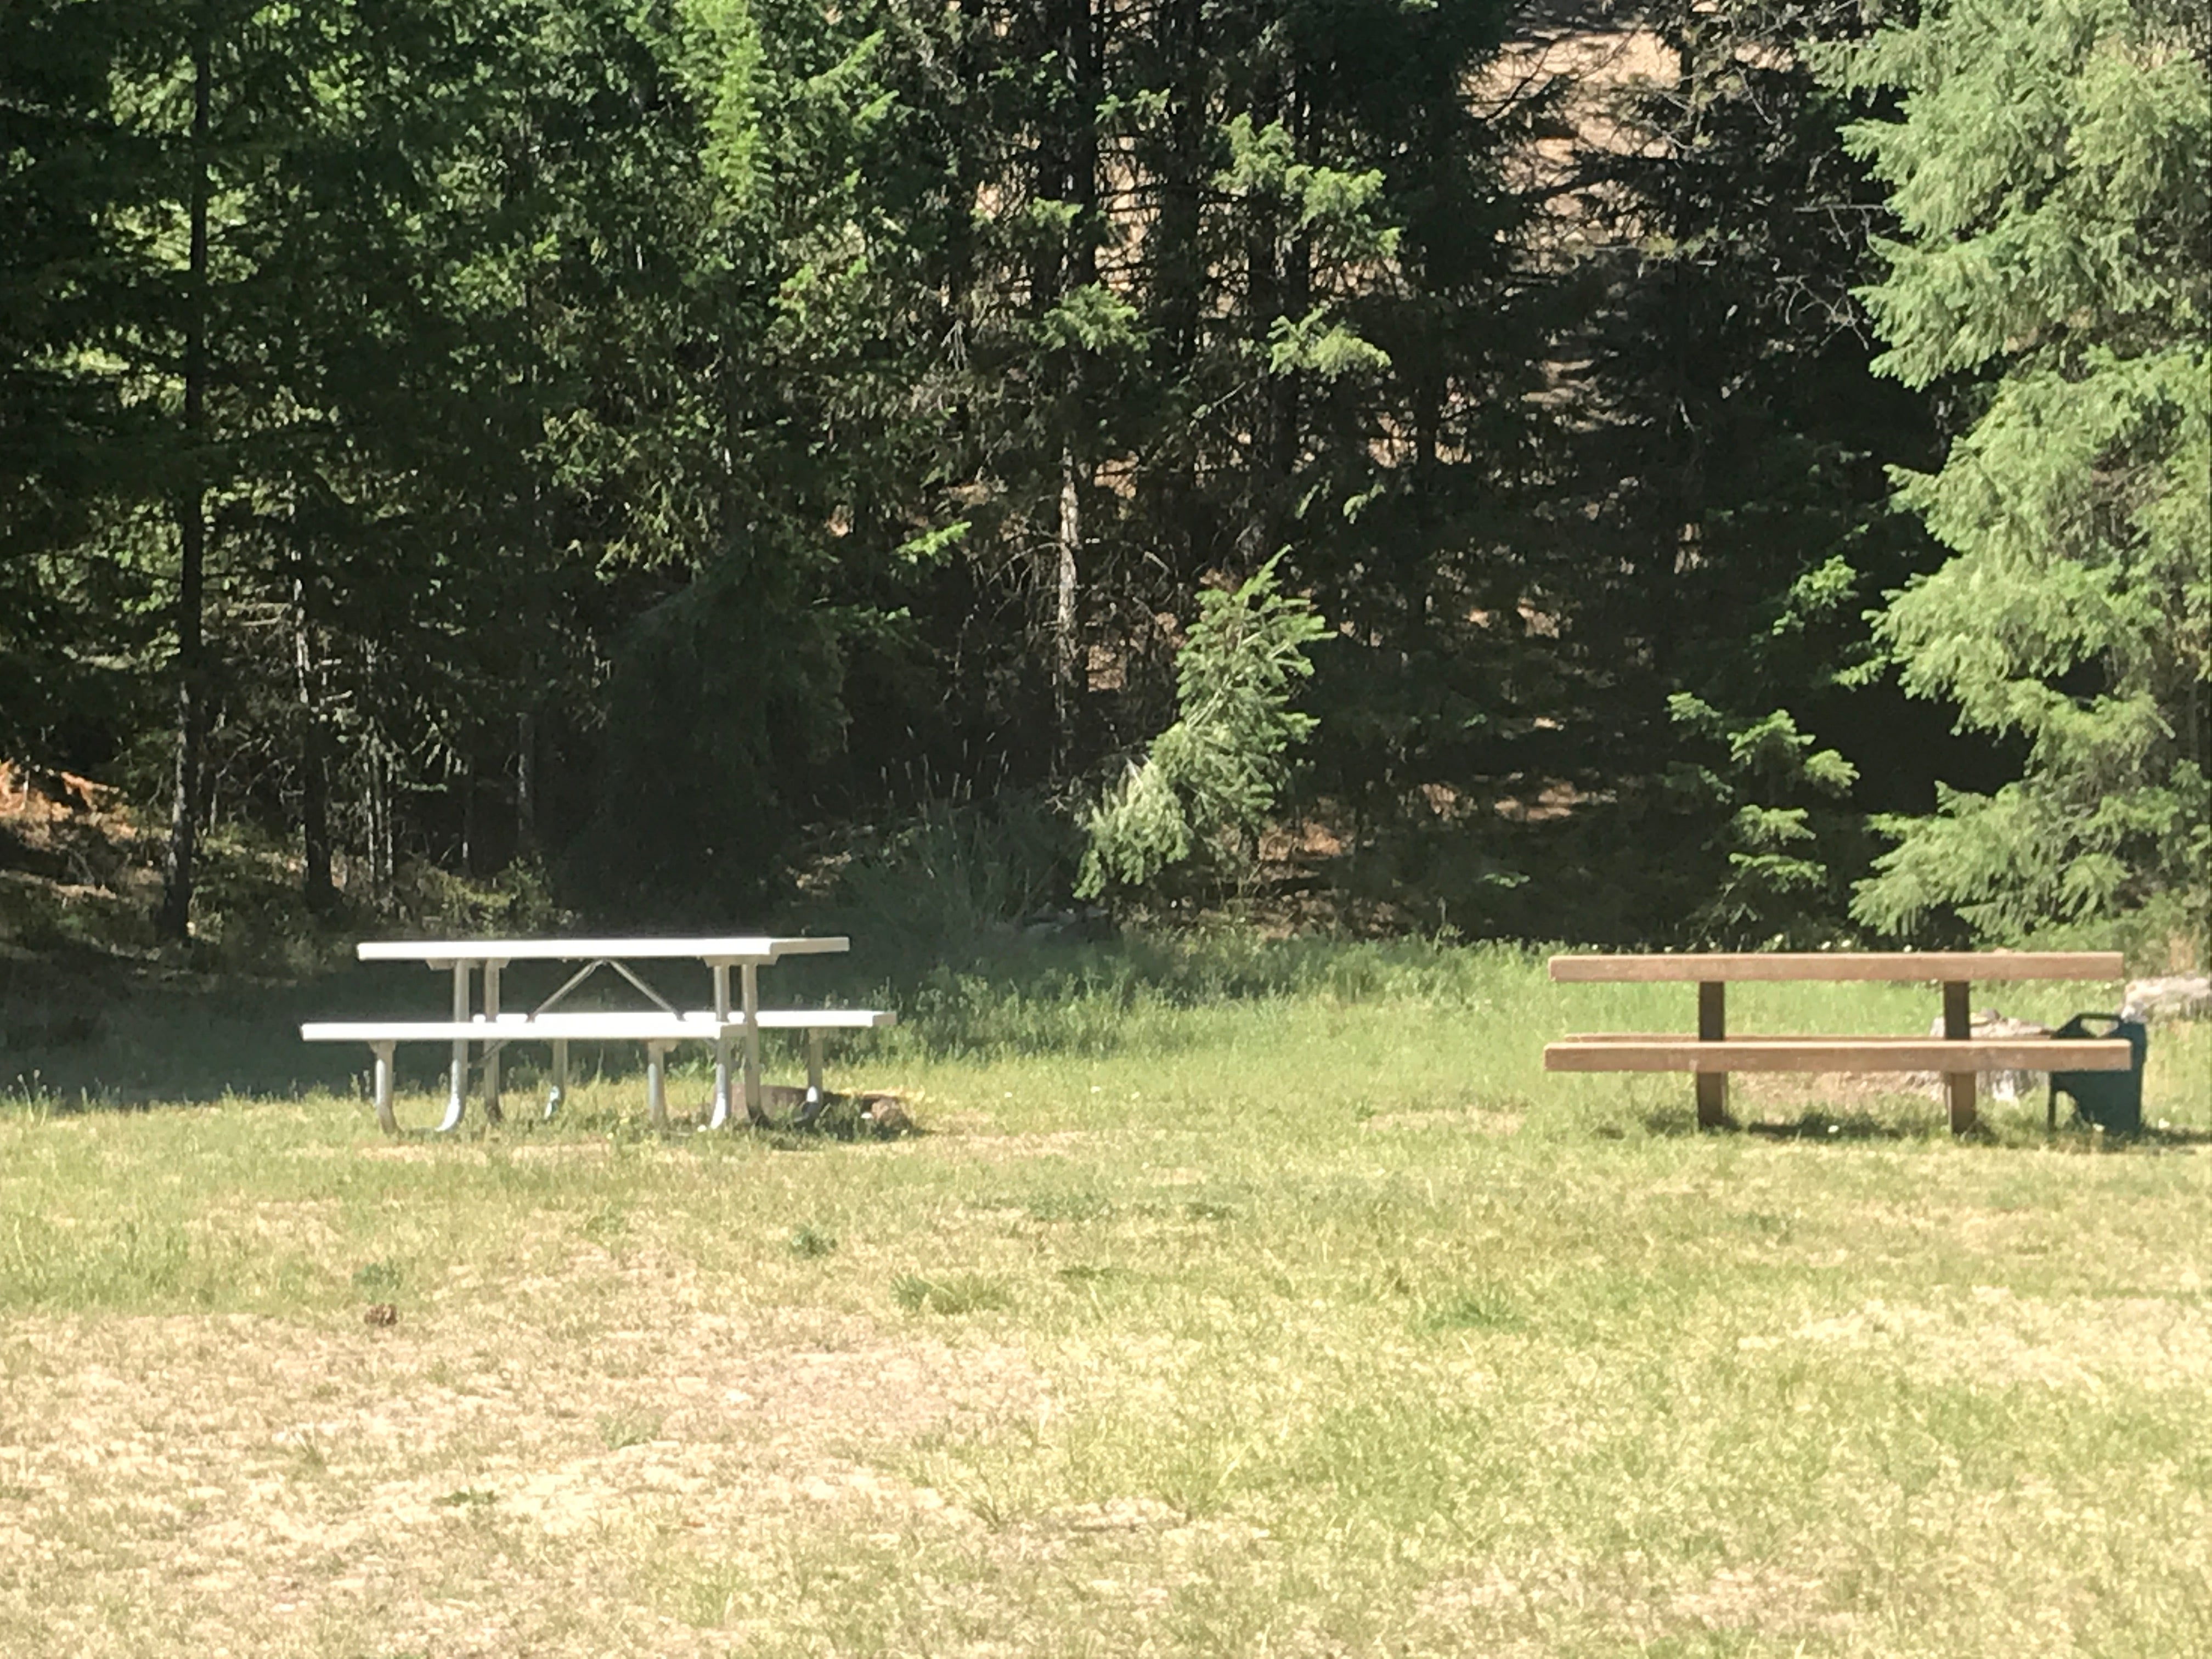 Sites are mostly designated by where there's a picnic table